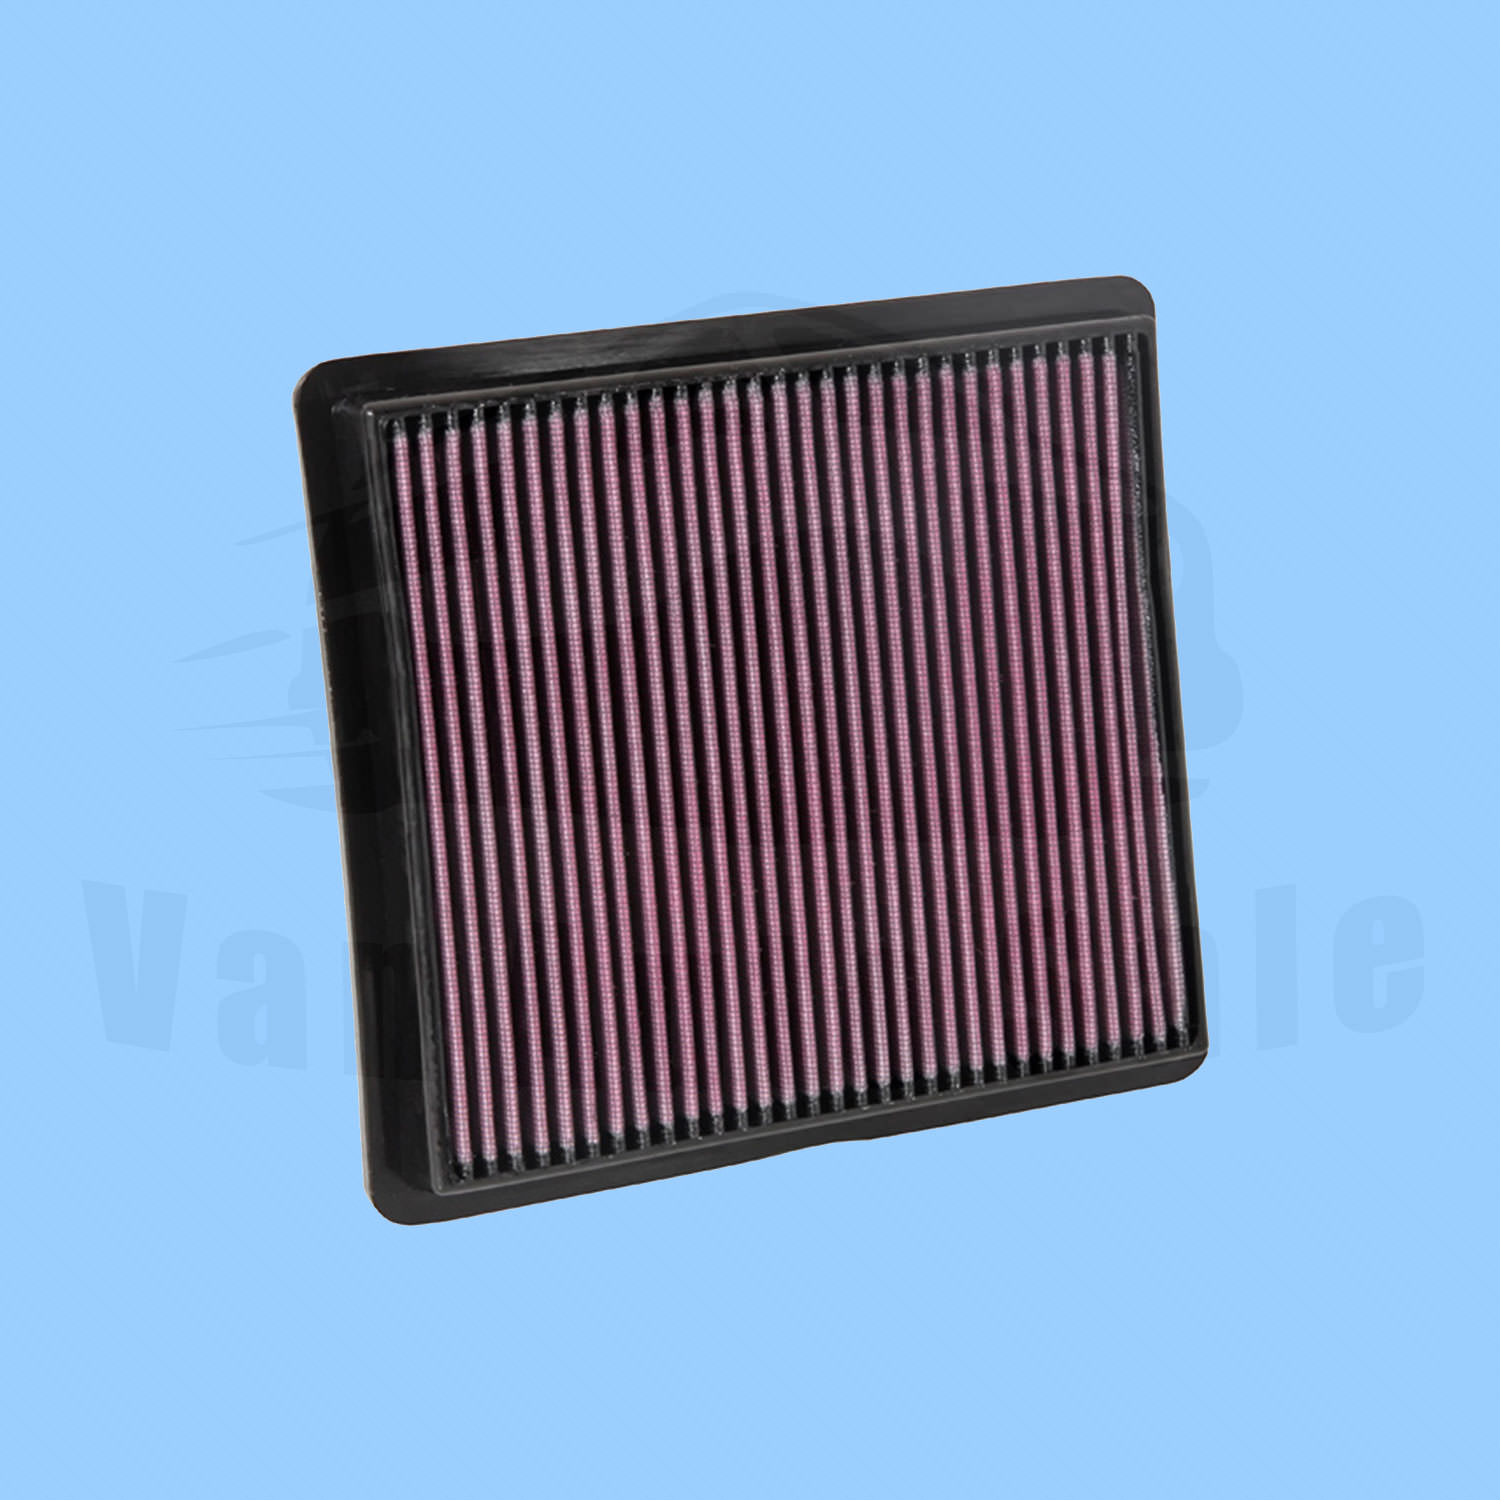 Replacement Air Filter K&N for Chrysler Town & Country 2008-2010 | eBay 2008 Chrysler Town And Country Air Filter